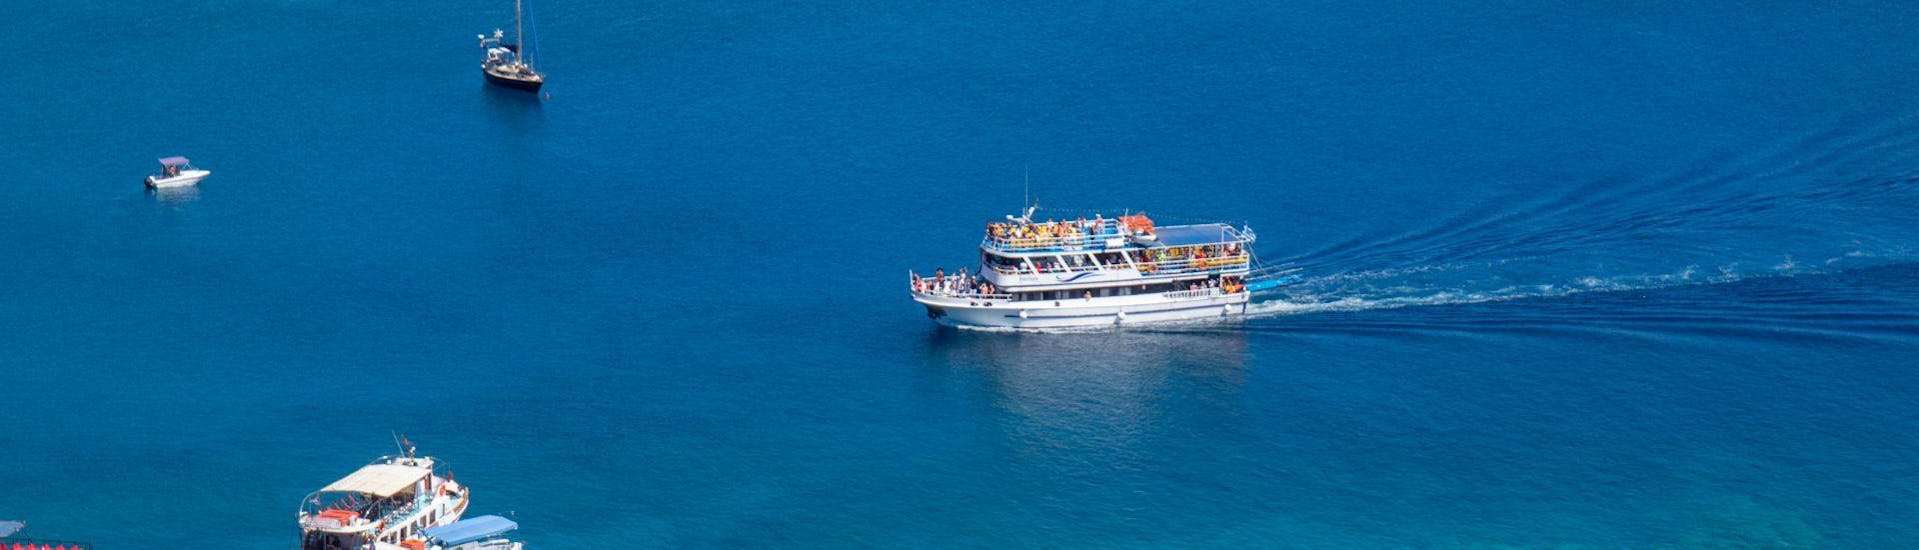 The boat is reaching Lindos during the Cruise to Lindos with Swimming Stop in Anthony Quinn’s Bay with Manos Going Rhodes.